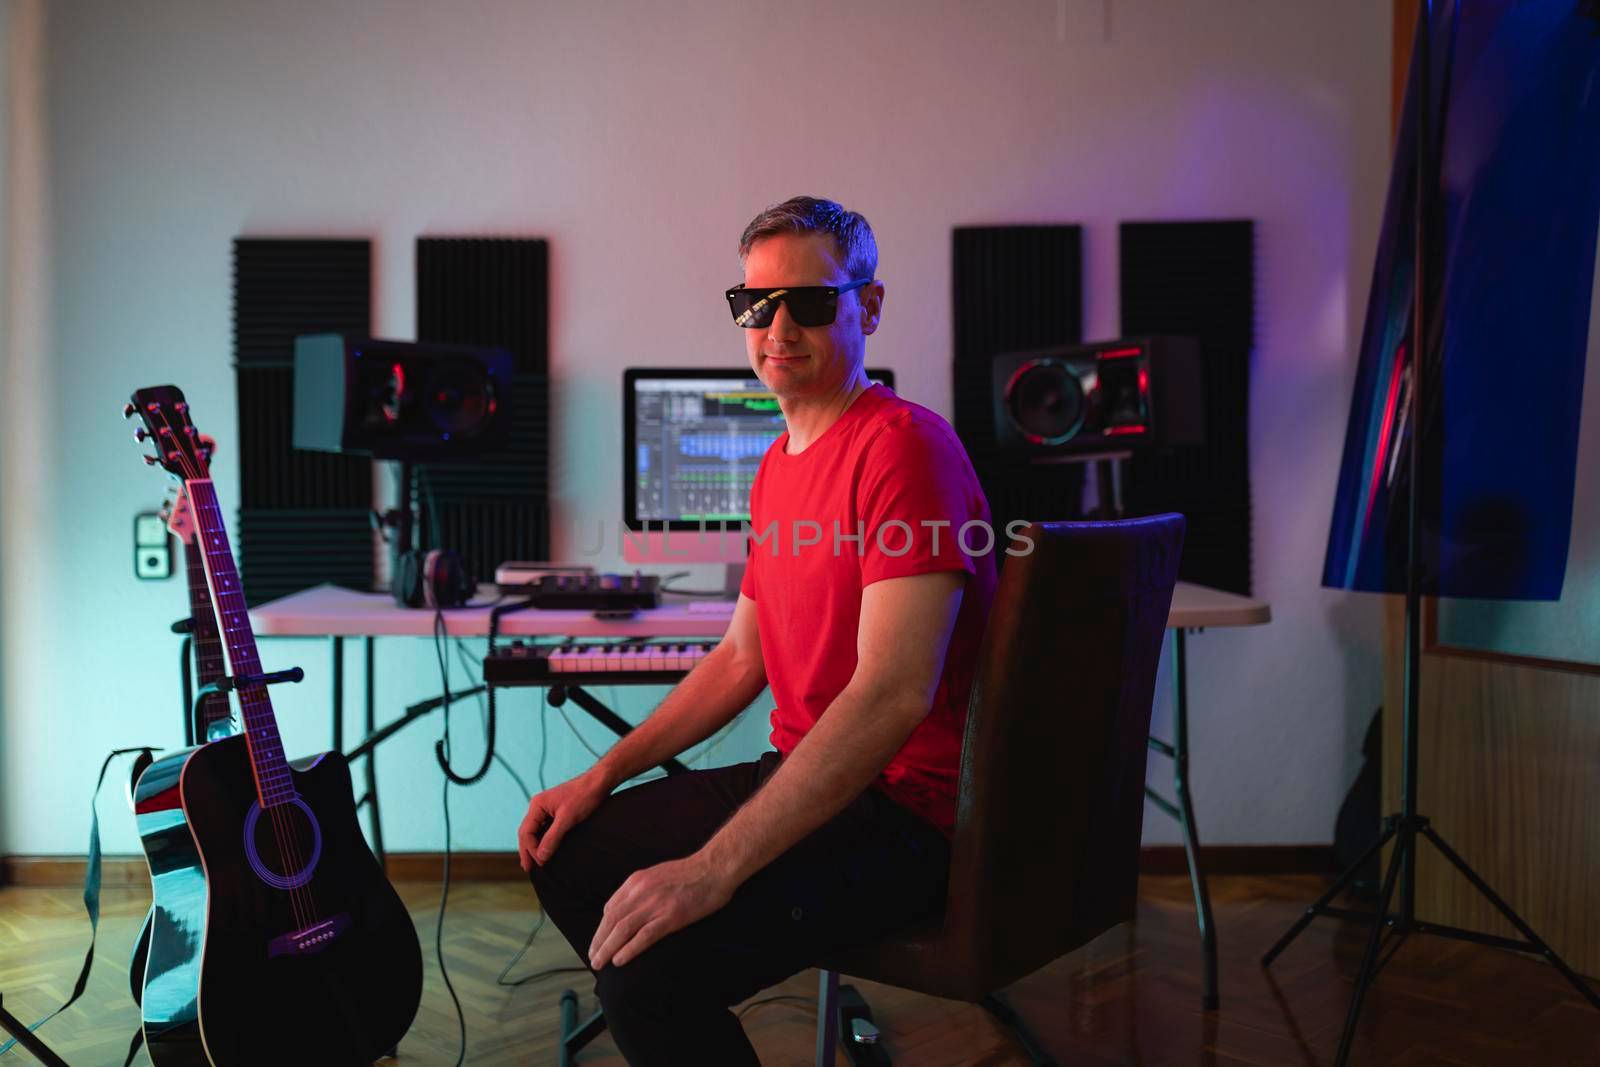 Music producer poses with sunglasses looking at camera while sitting on his chair during a recording session at his home studio